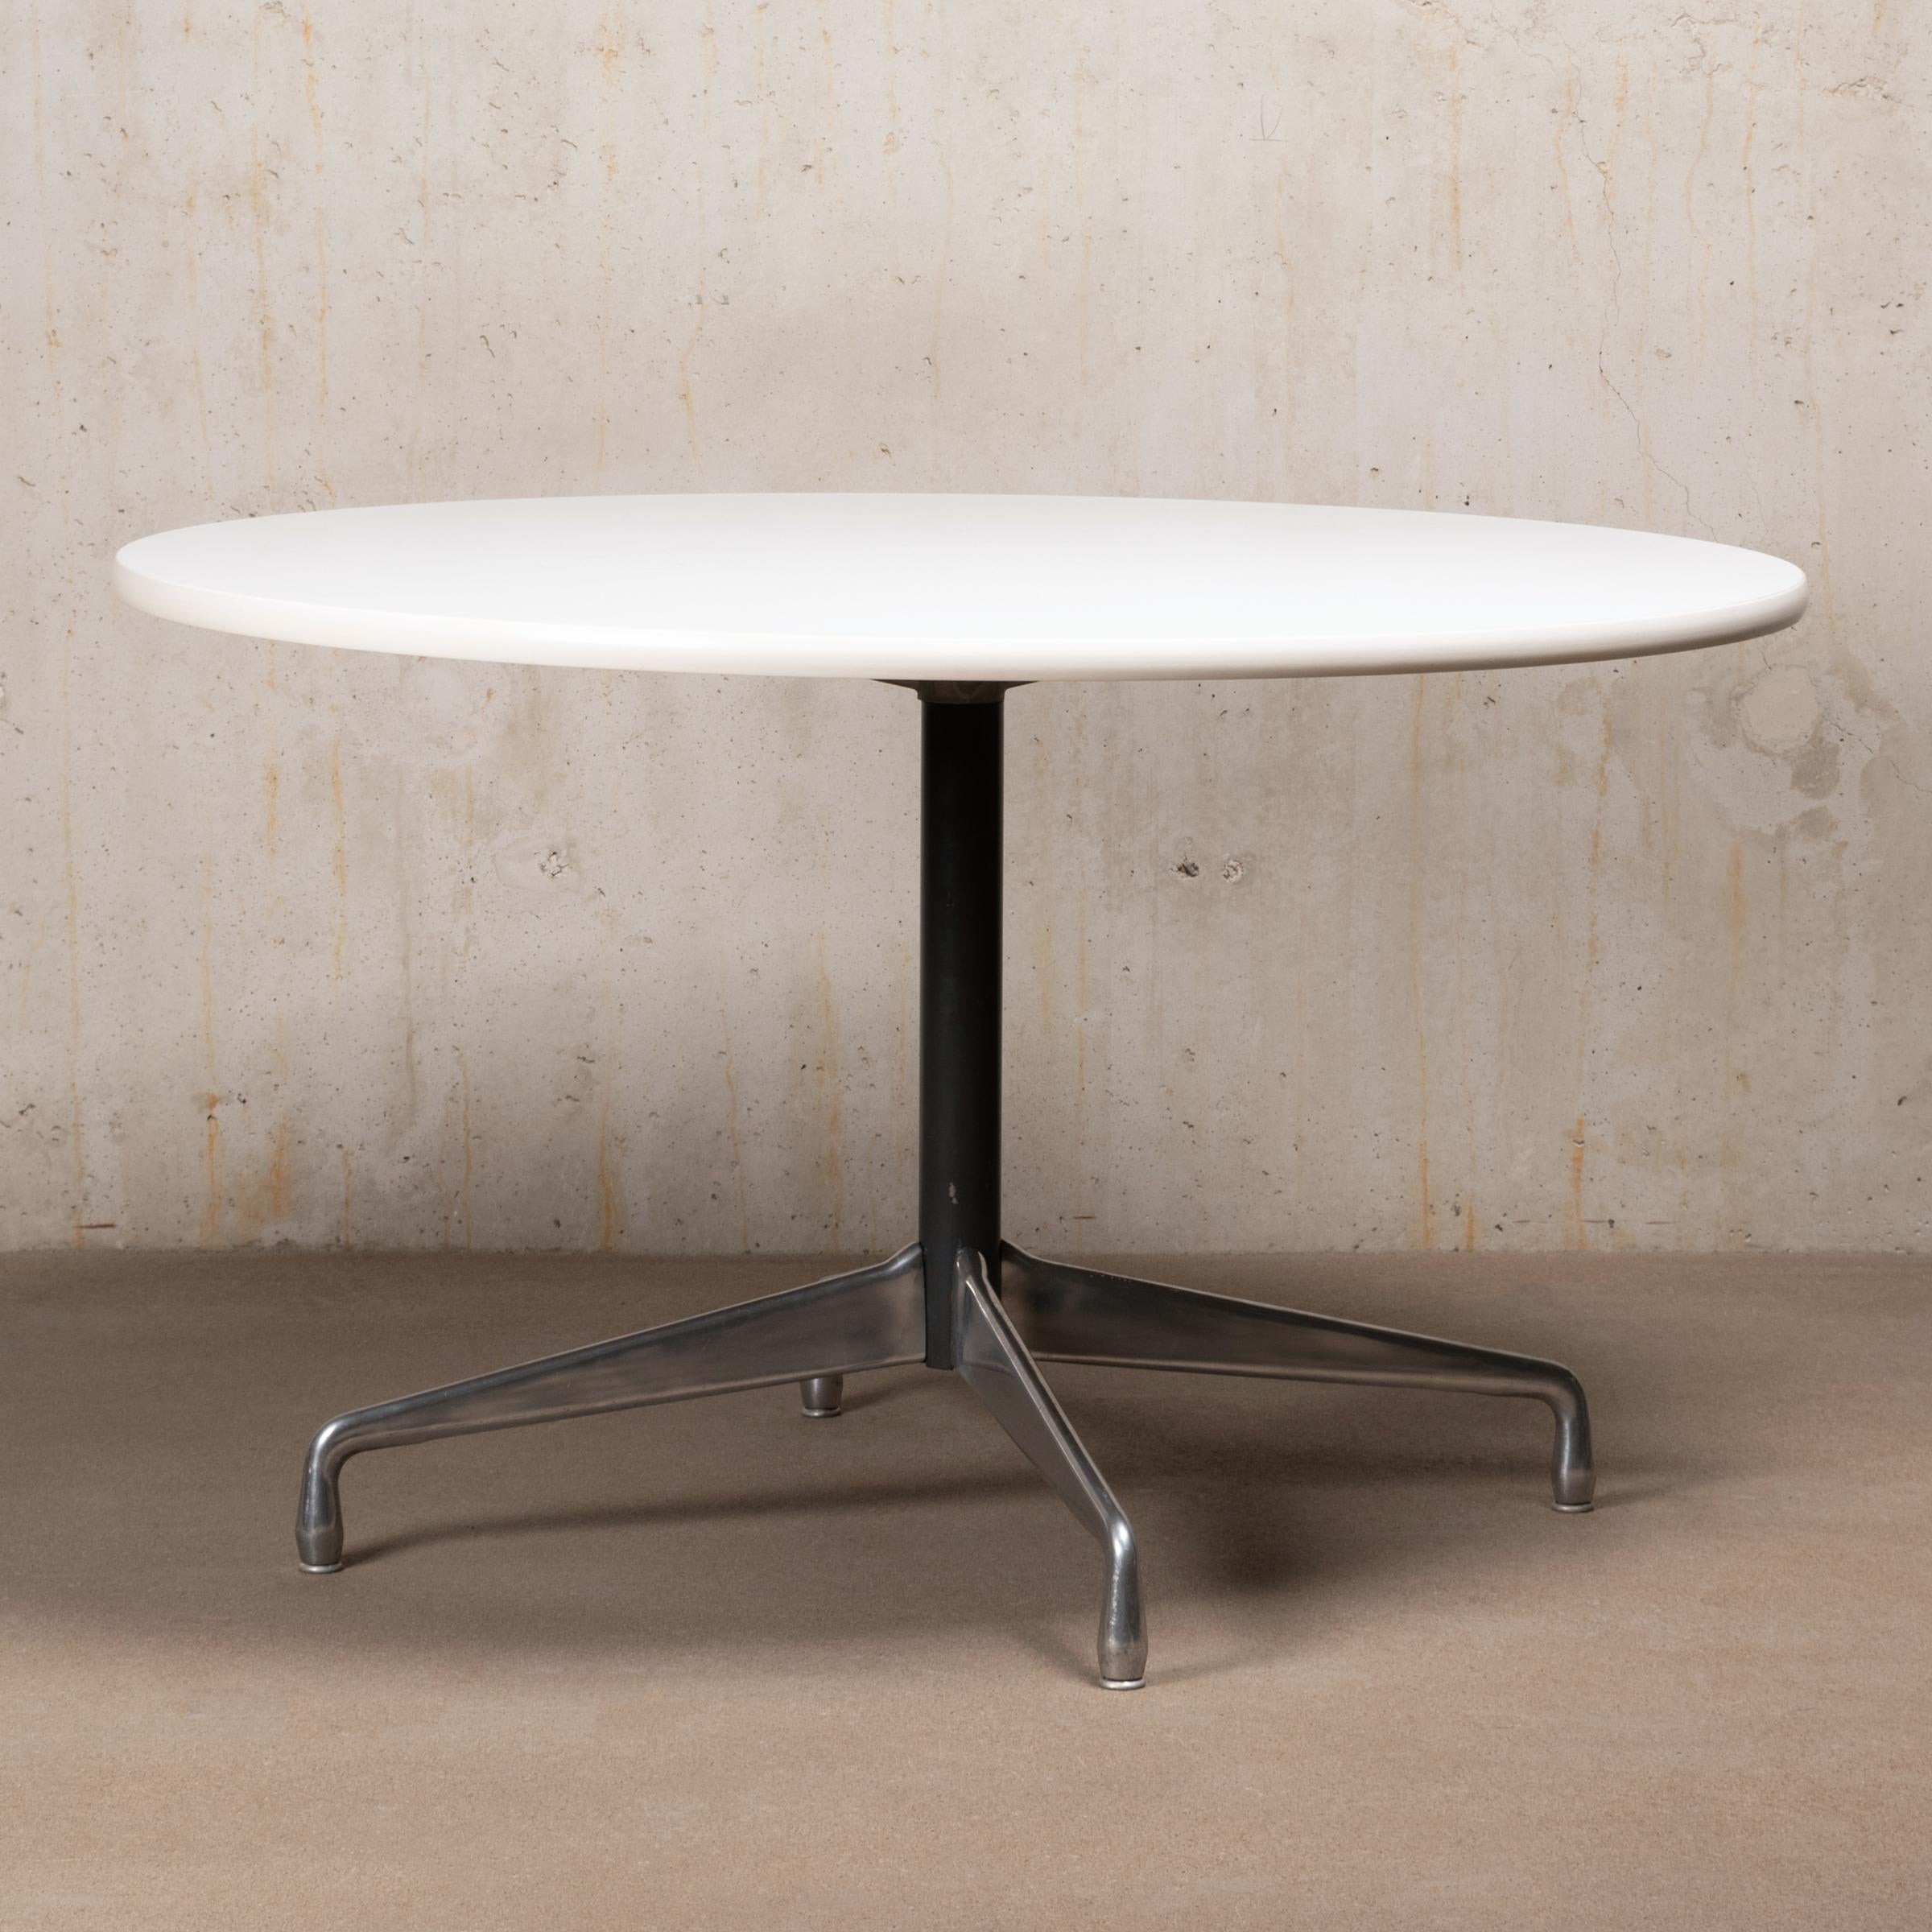 Early dining table by Charles and Ray Eames for Herman Miller. Chrome plated cast aluminum base with (height) adjustable glides and white laminated table top with rubber edge. The tabletop has a diameter of 122 cm (47 3/4 inch), suitable for 4